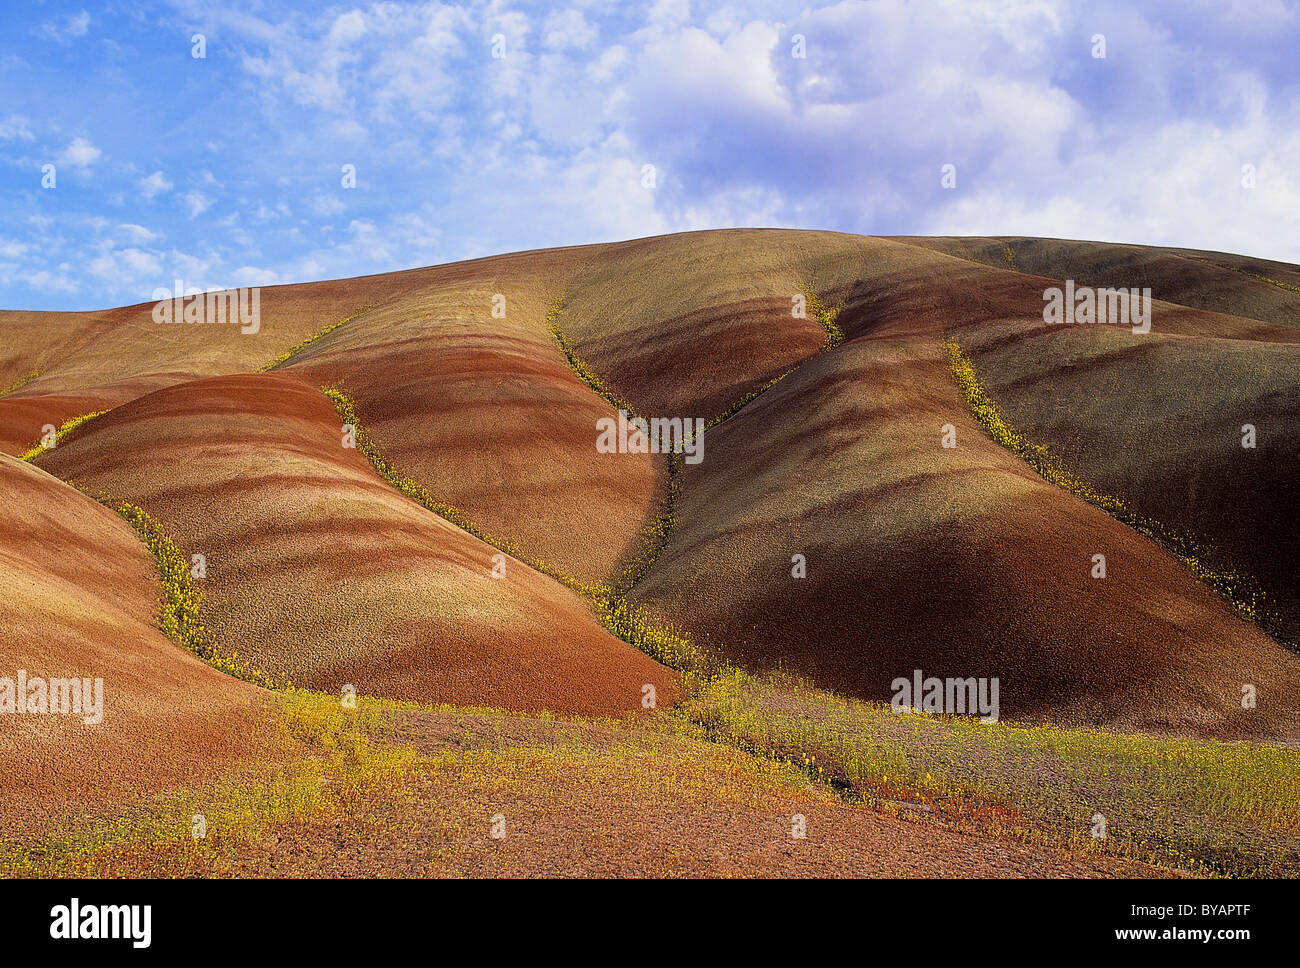 USA, Oregon, John Day Fossil Beds National Monument. Chaenactis flowers line striped claystone slopes of the Painted Hills Unit. Stock Photo